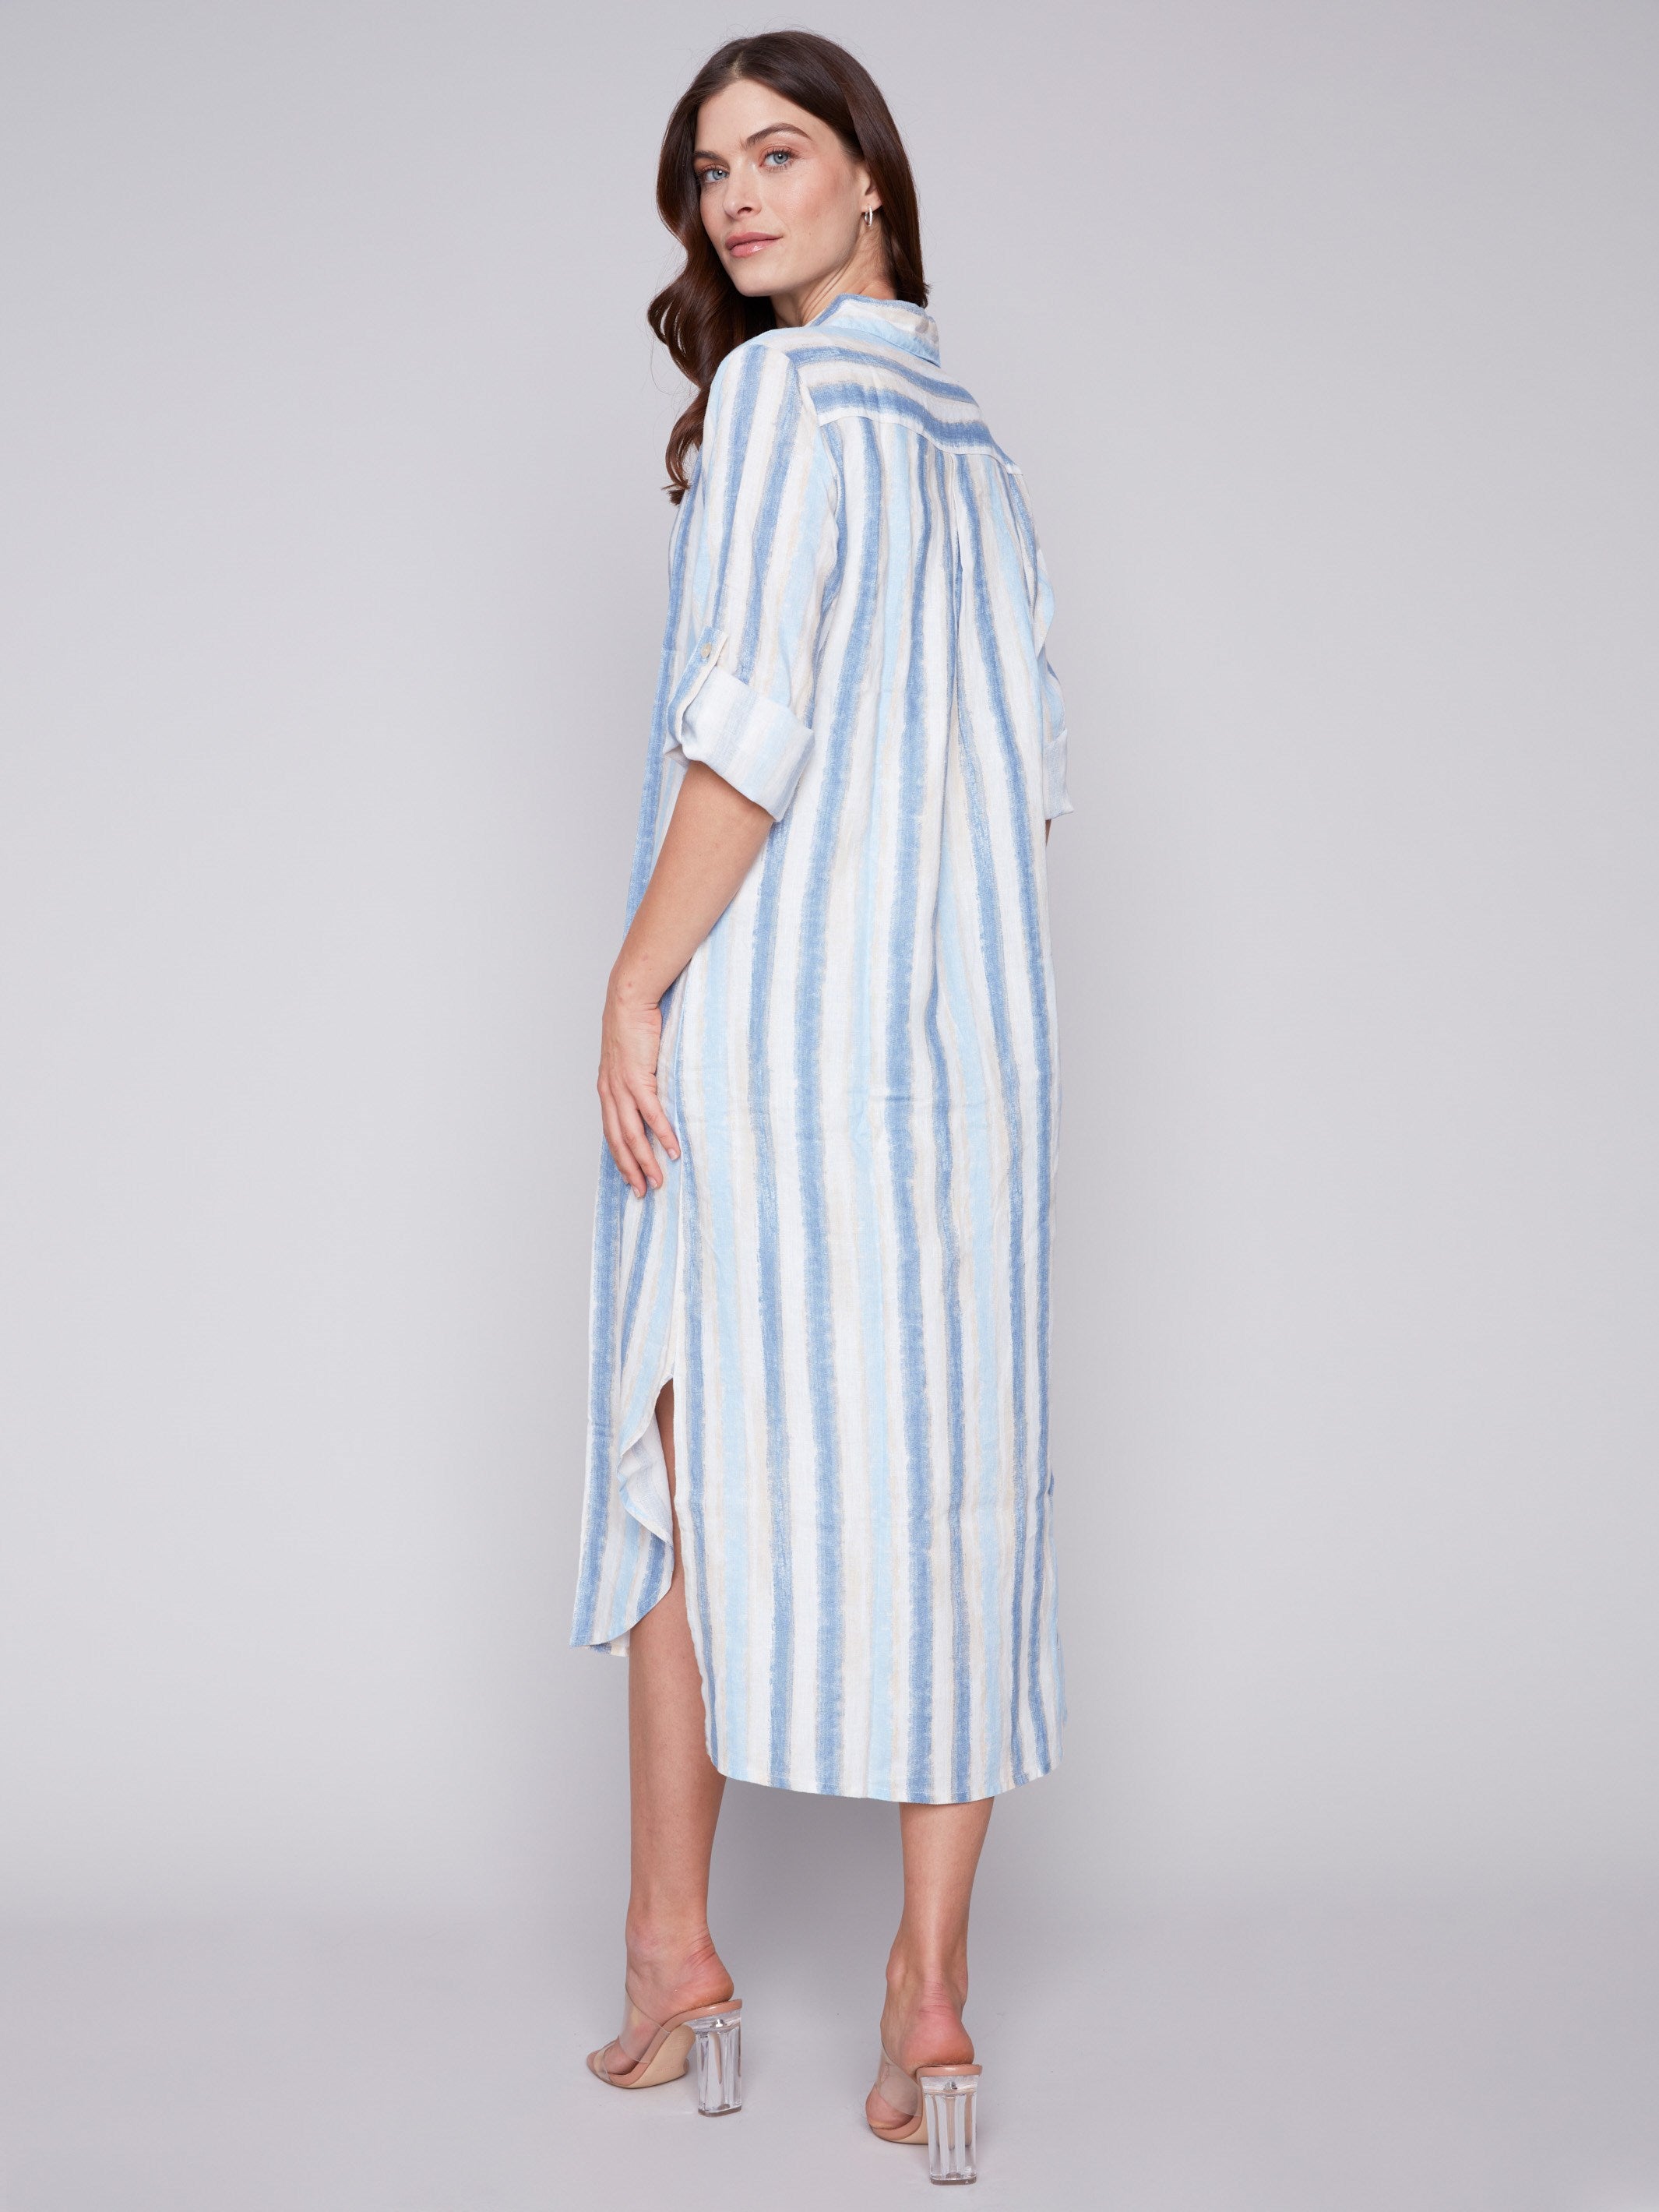 Striped Long Linen Tunic Dress - Nautical - Charlie B Collection Canada - Image 3